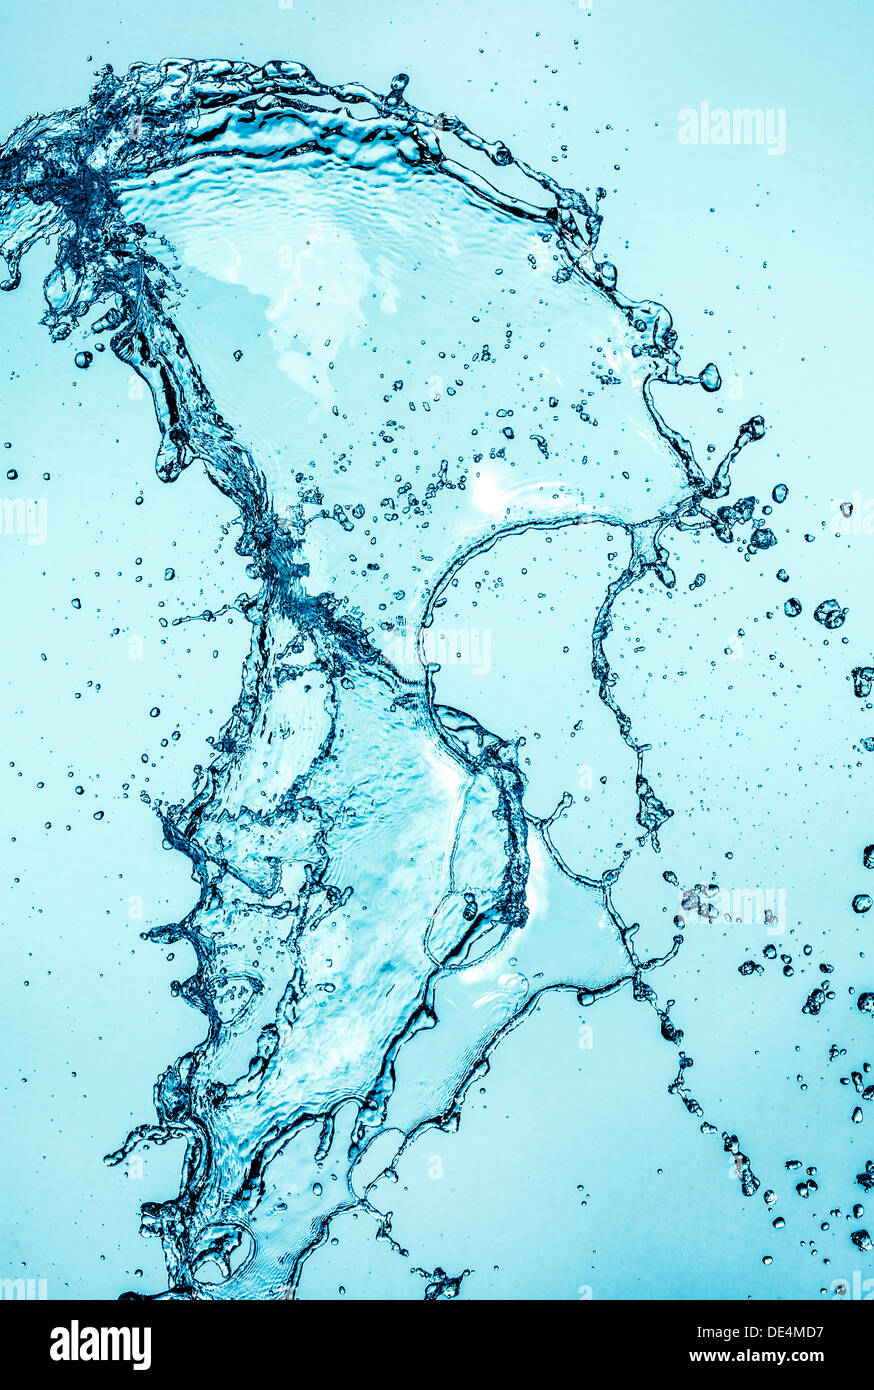 Abstract water splash on blue background. Stock Photo